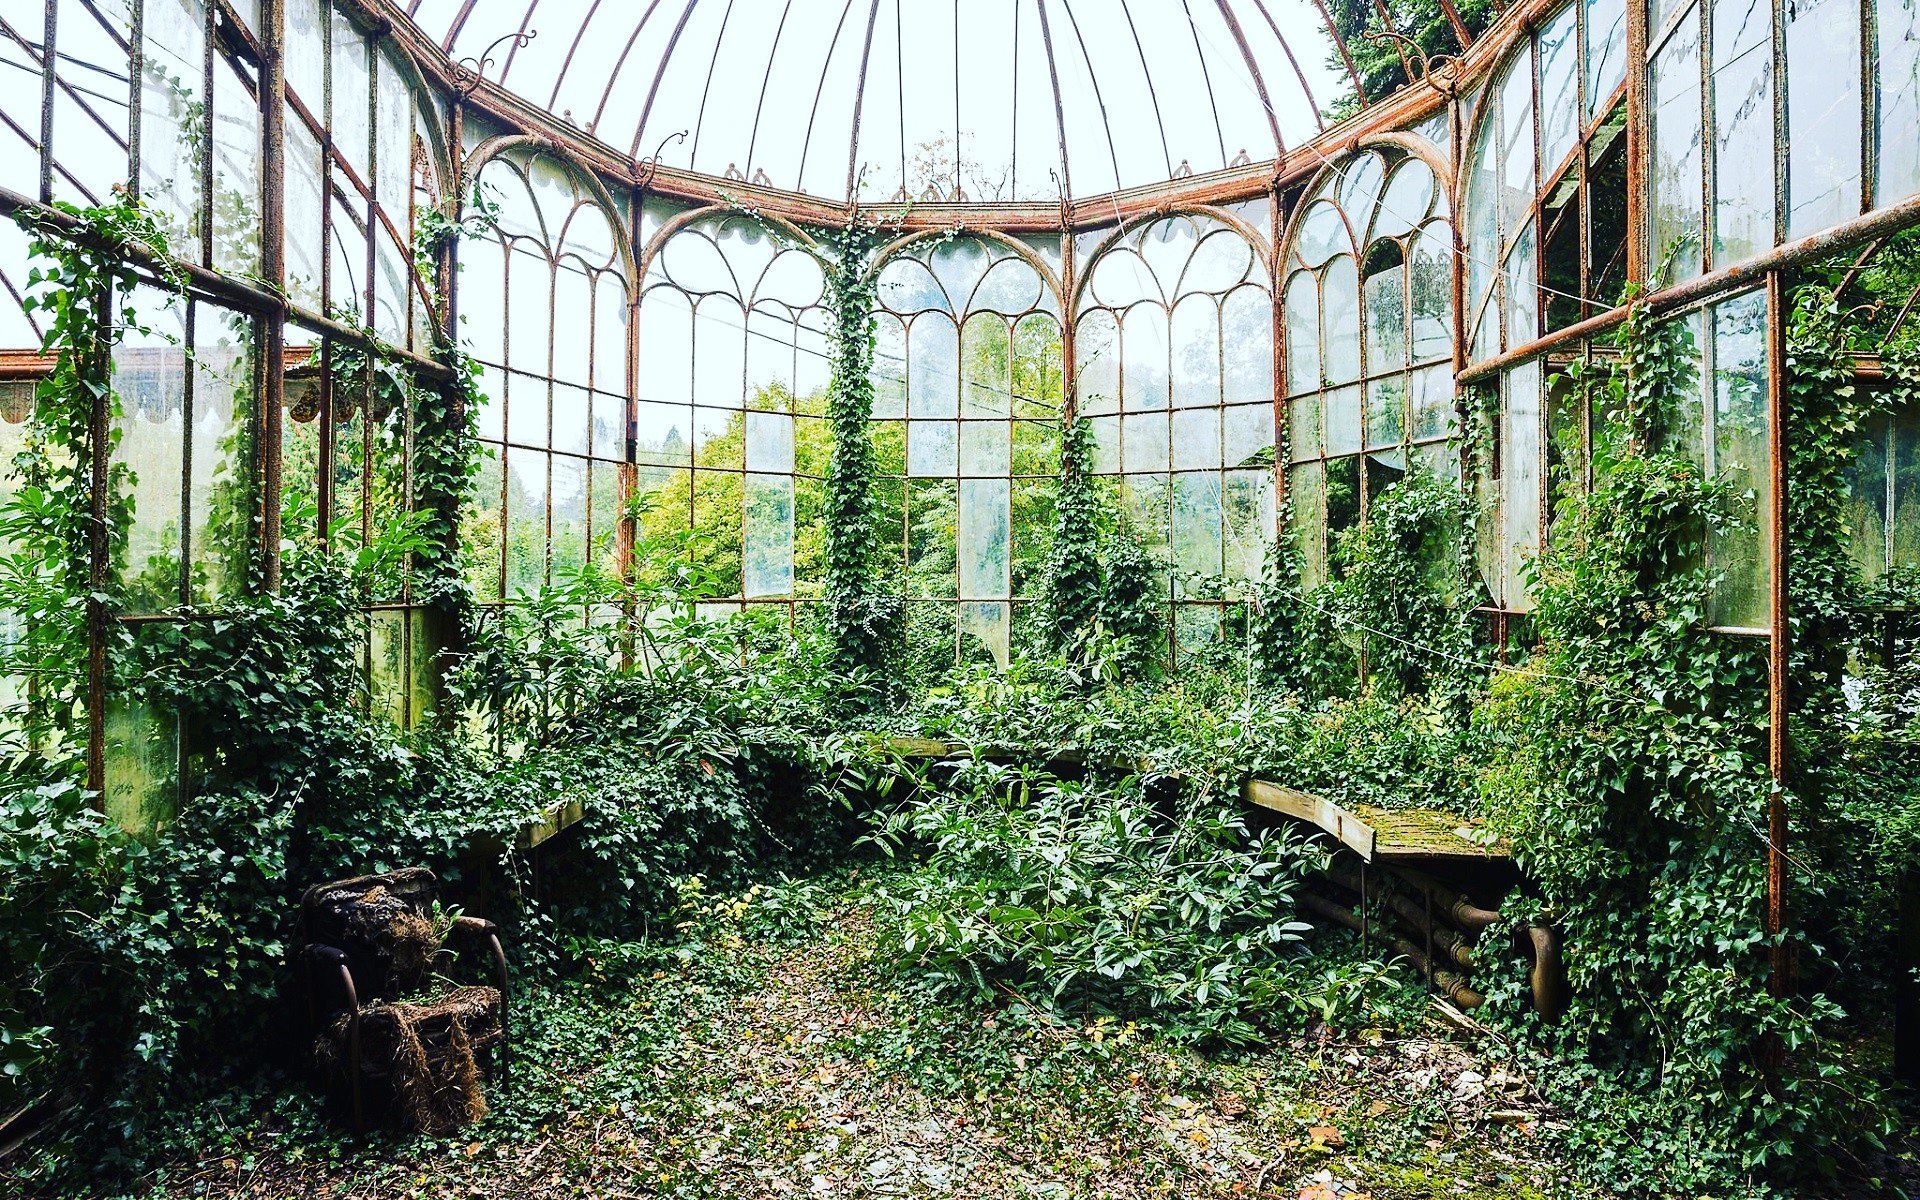 Everything about this image speaks to my soul in ways that I cannot fully. Glass house, Greenhouse, Outdoor decor